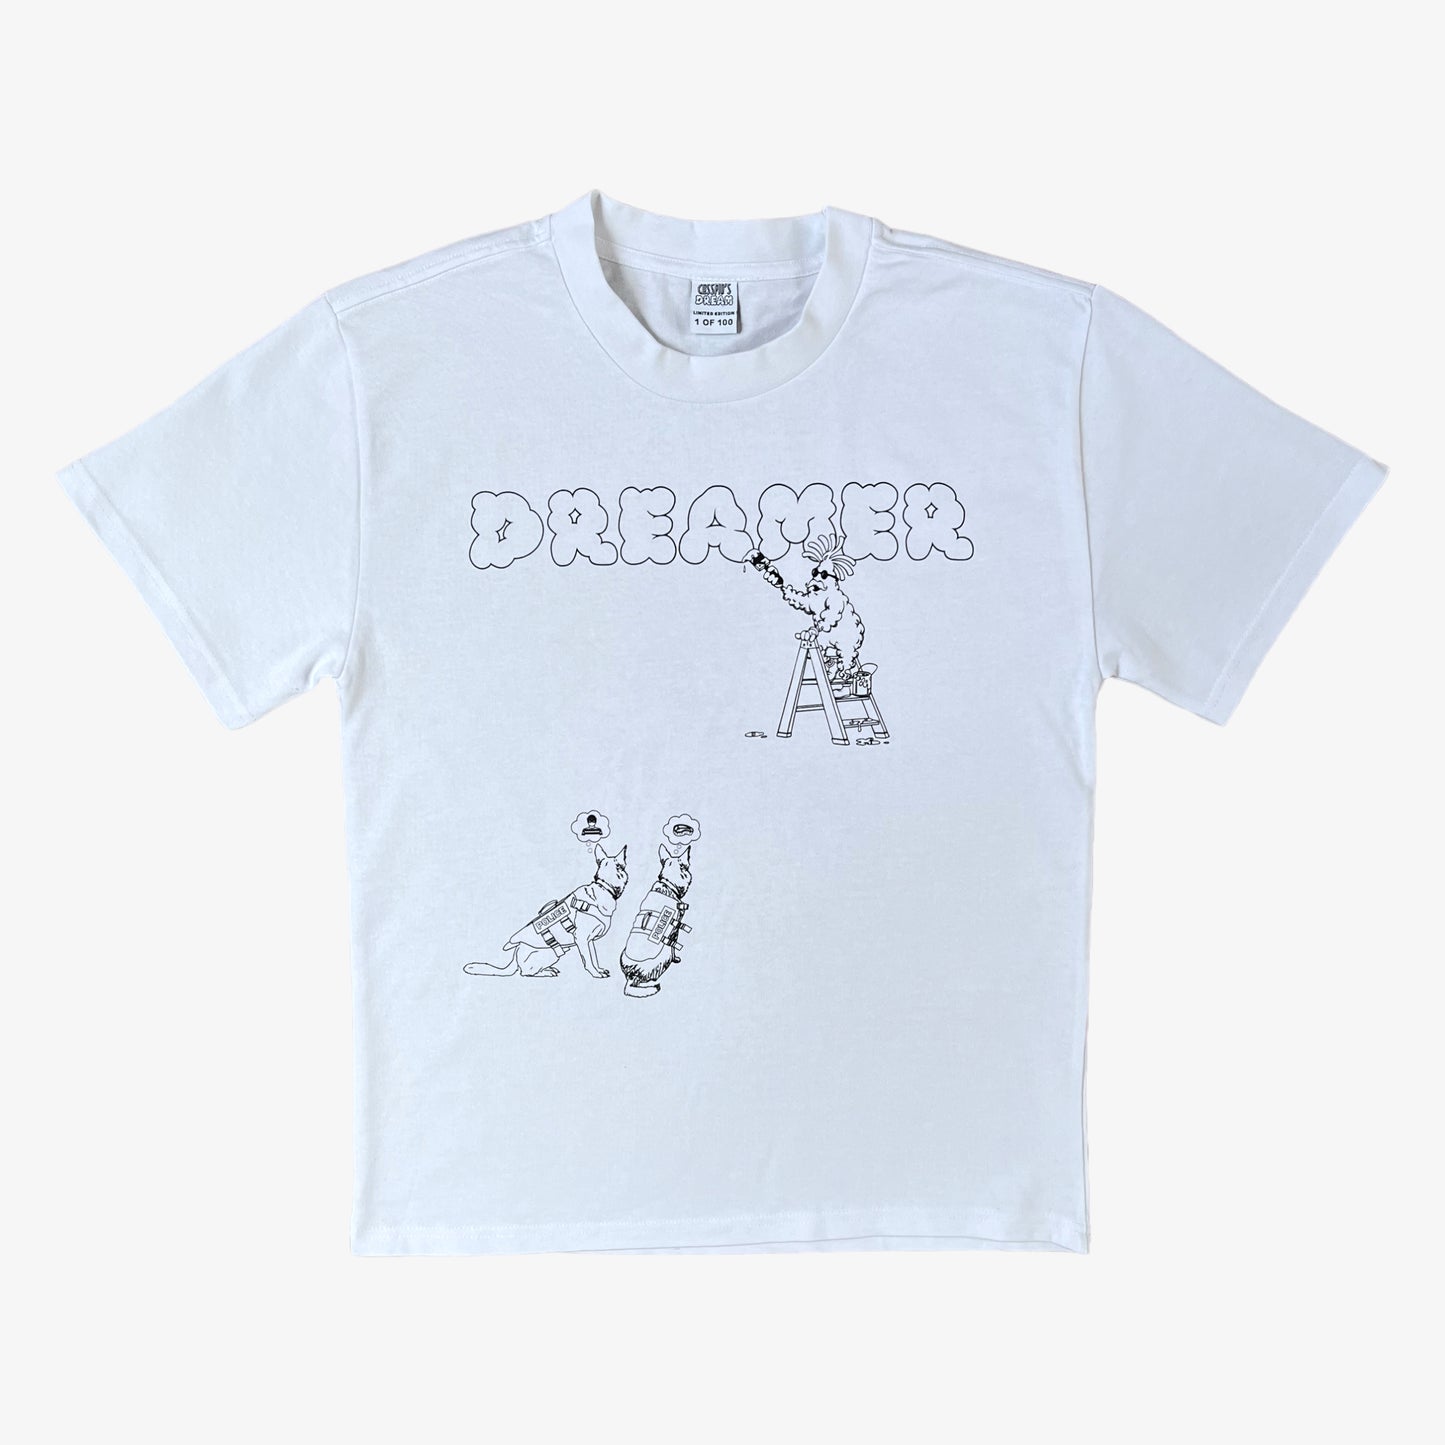 Casspios Dream Limited Edition 1 of 100 Dreamers Never Stop Creating Heavyweight Oversized White Top - Casspios Dream